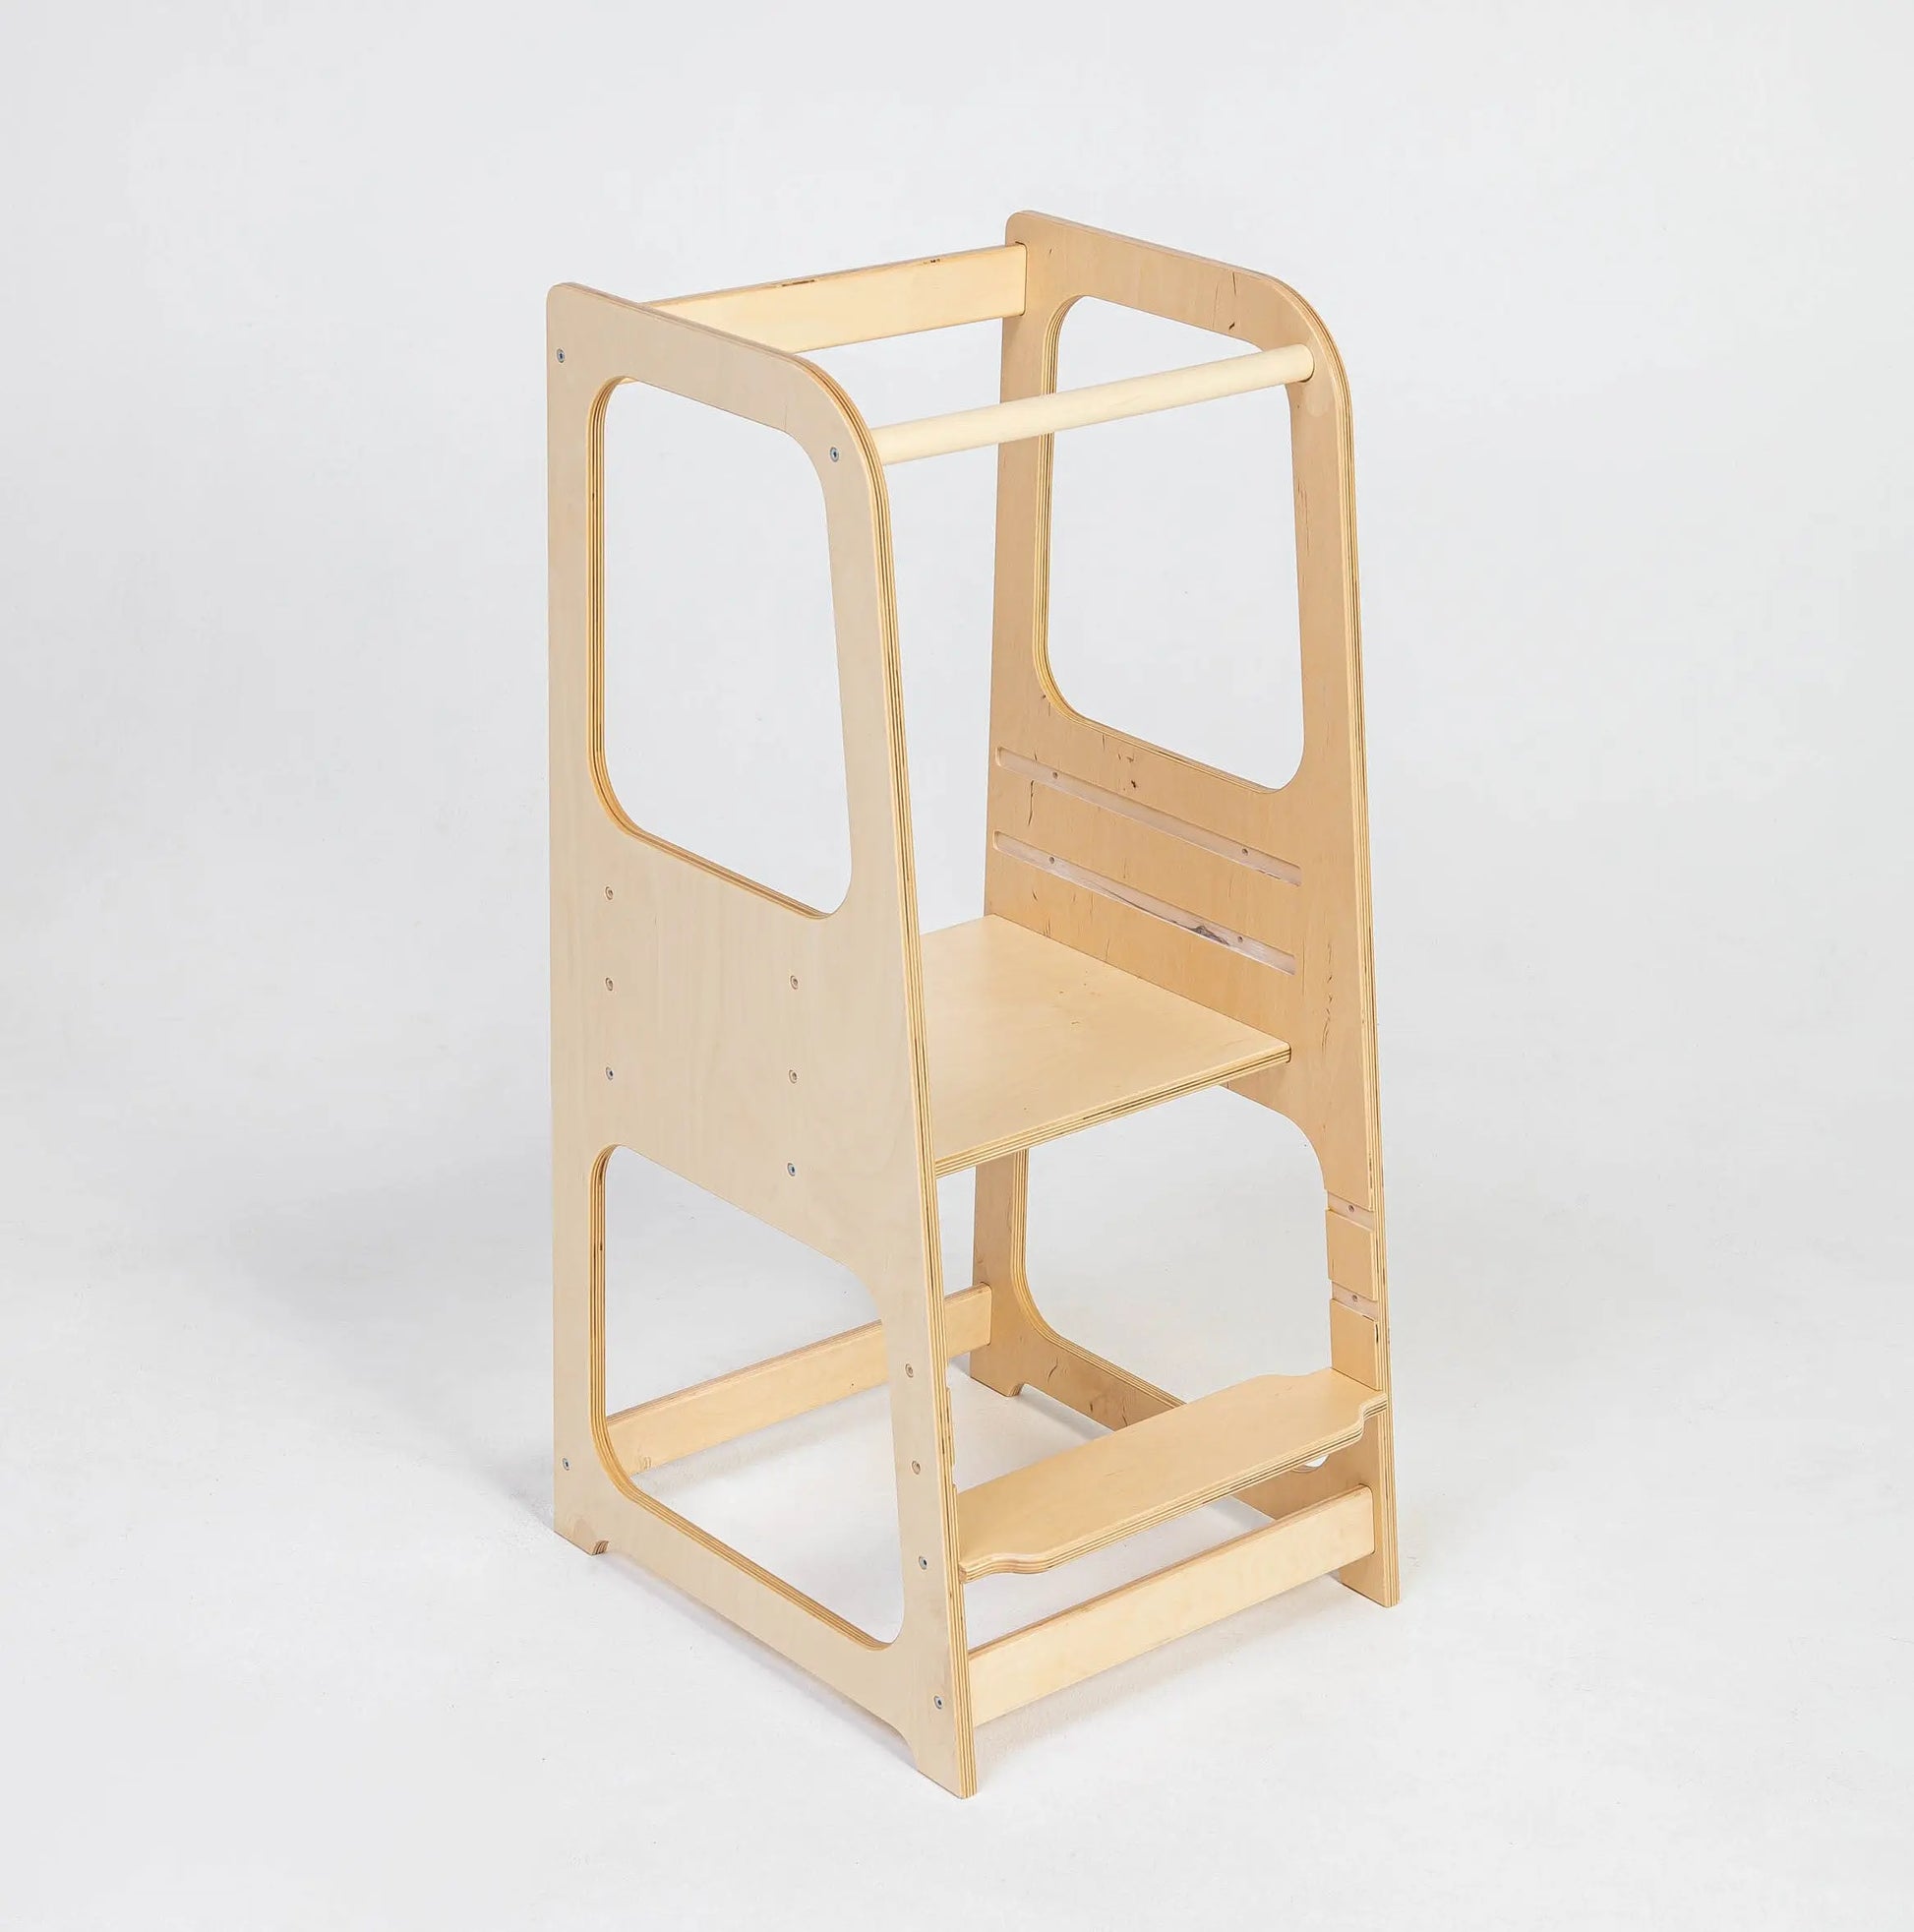 A Montessori Learning Tower Step Stool for Kids - 2-in-1 design, crafted from sturdy wood, with adjustable height levels for safe kitchen exploration.